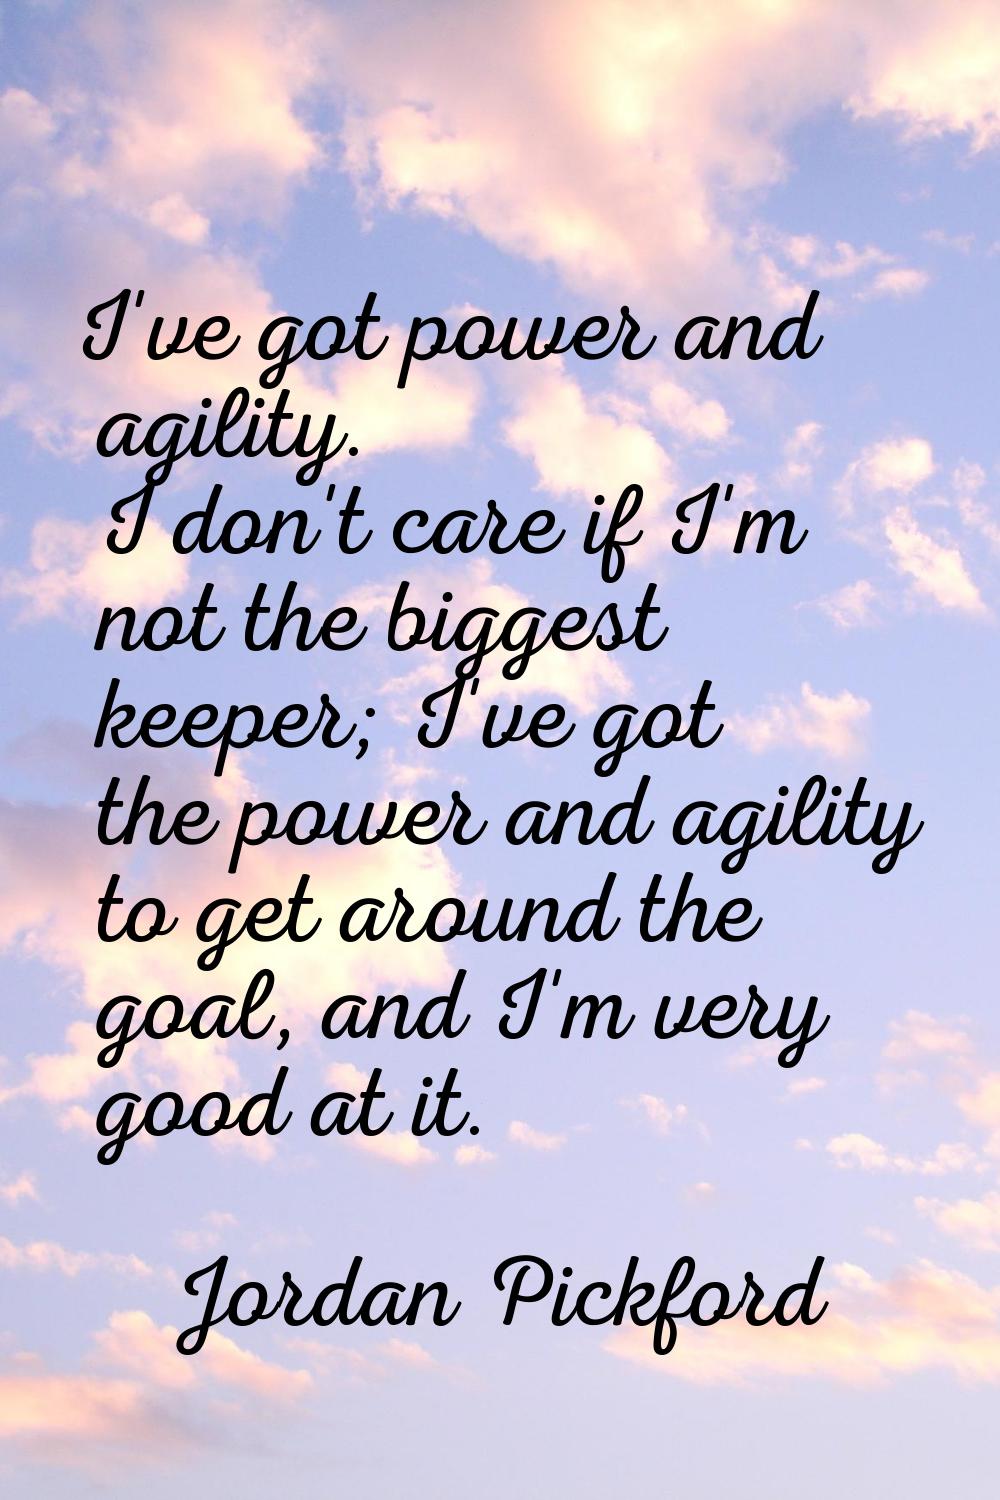 I've got power and agility. I don't care if I'm not the biggest keeper; I've got the power and agil